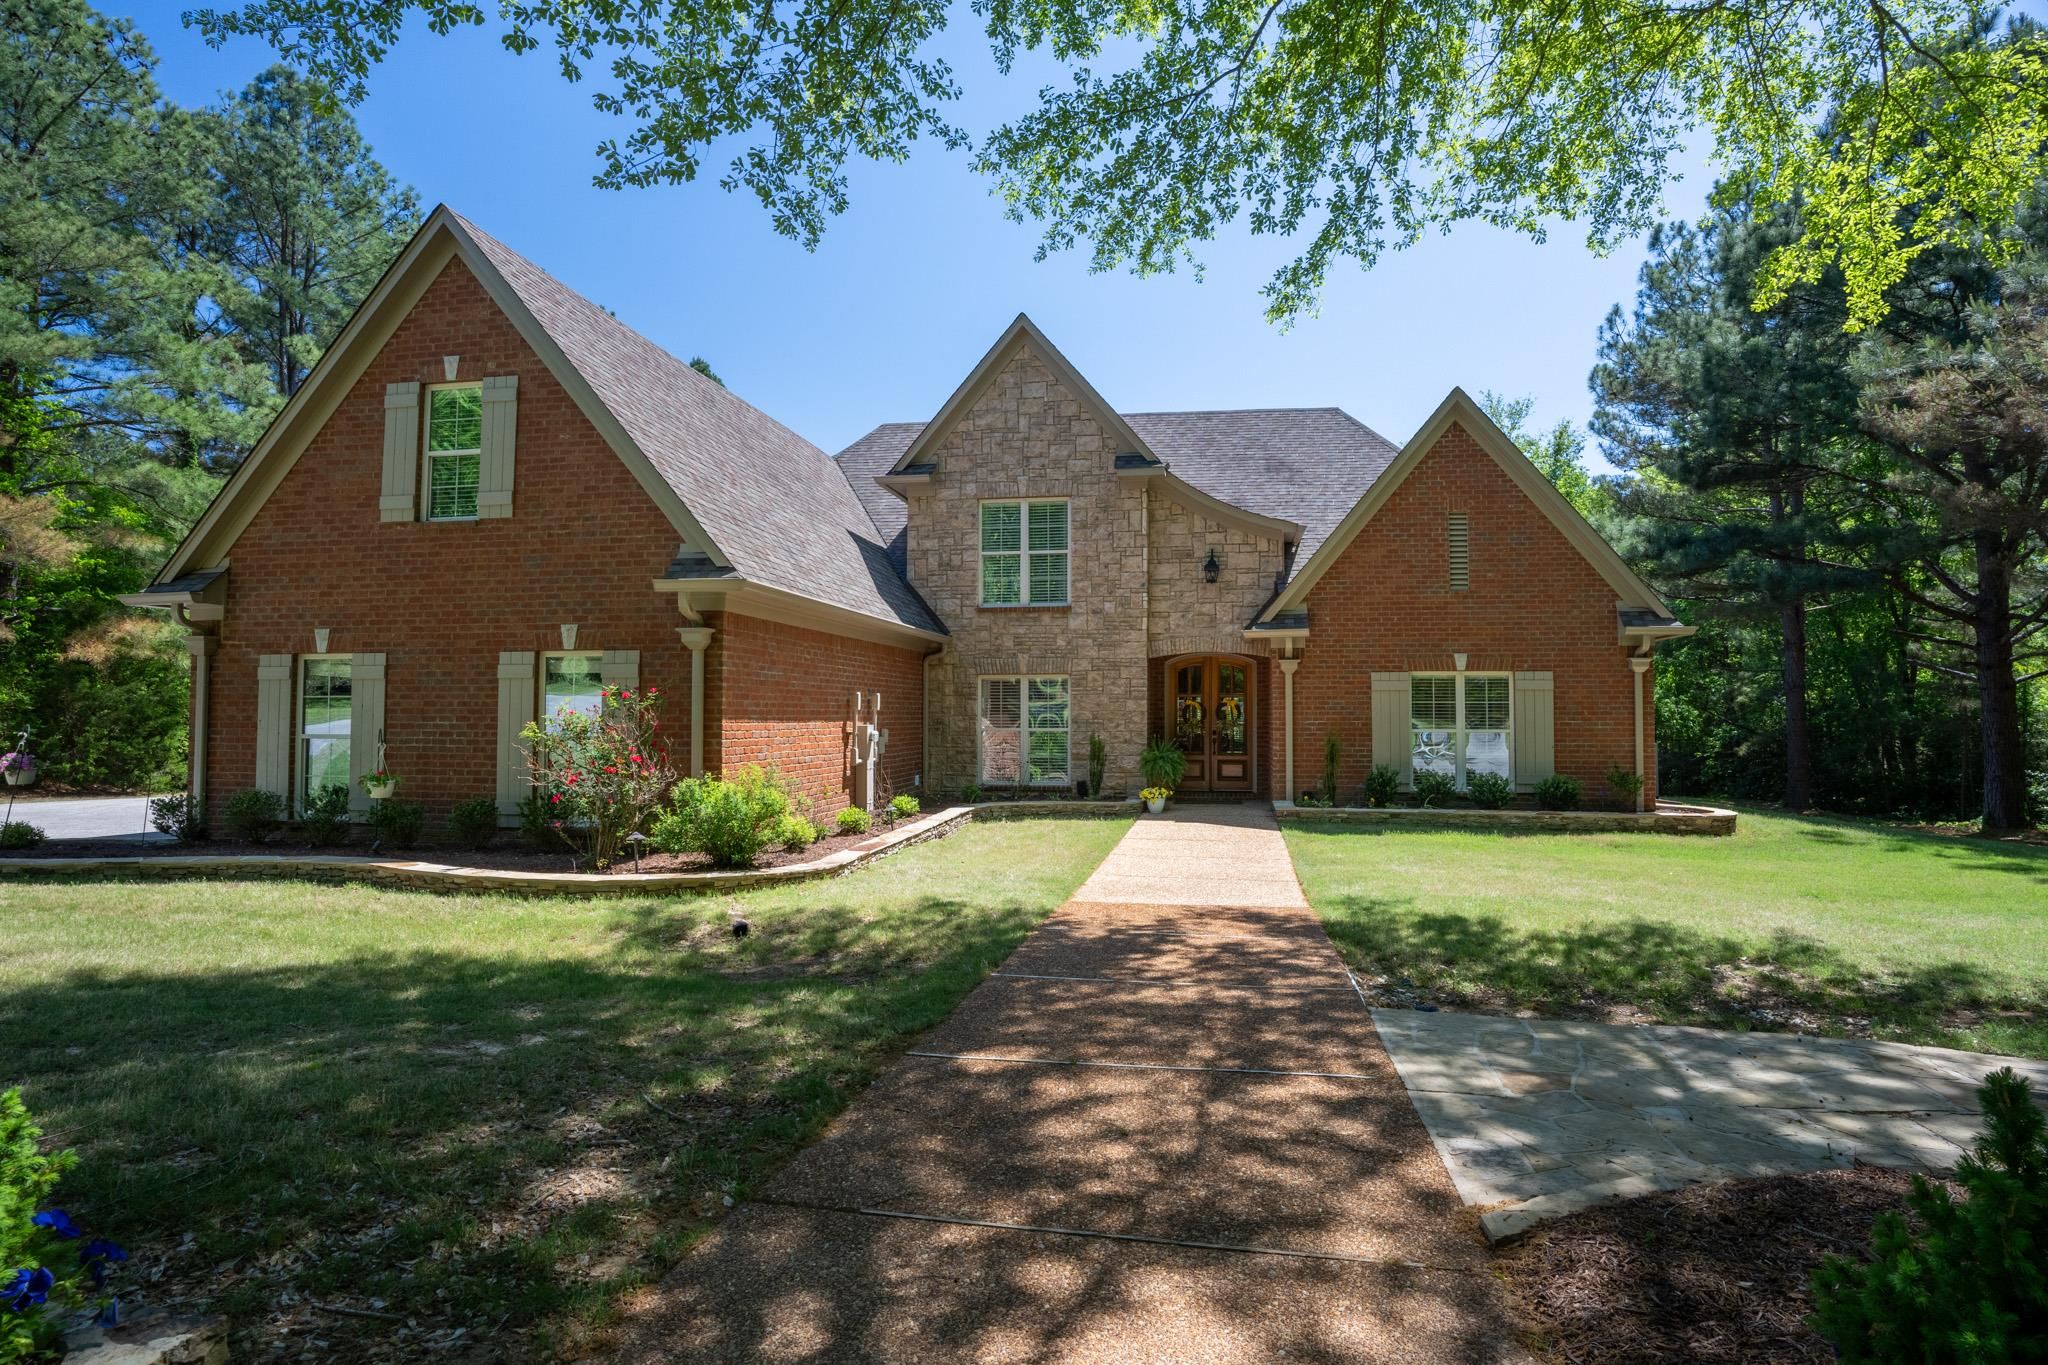 This beautiful custom built all brick home sits on 4 acres in Collierville Reserve with No City Taxes. The sellers have meticulously maintained and planned every bit of it!